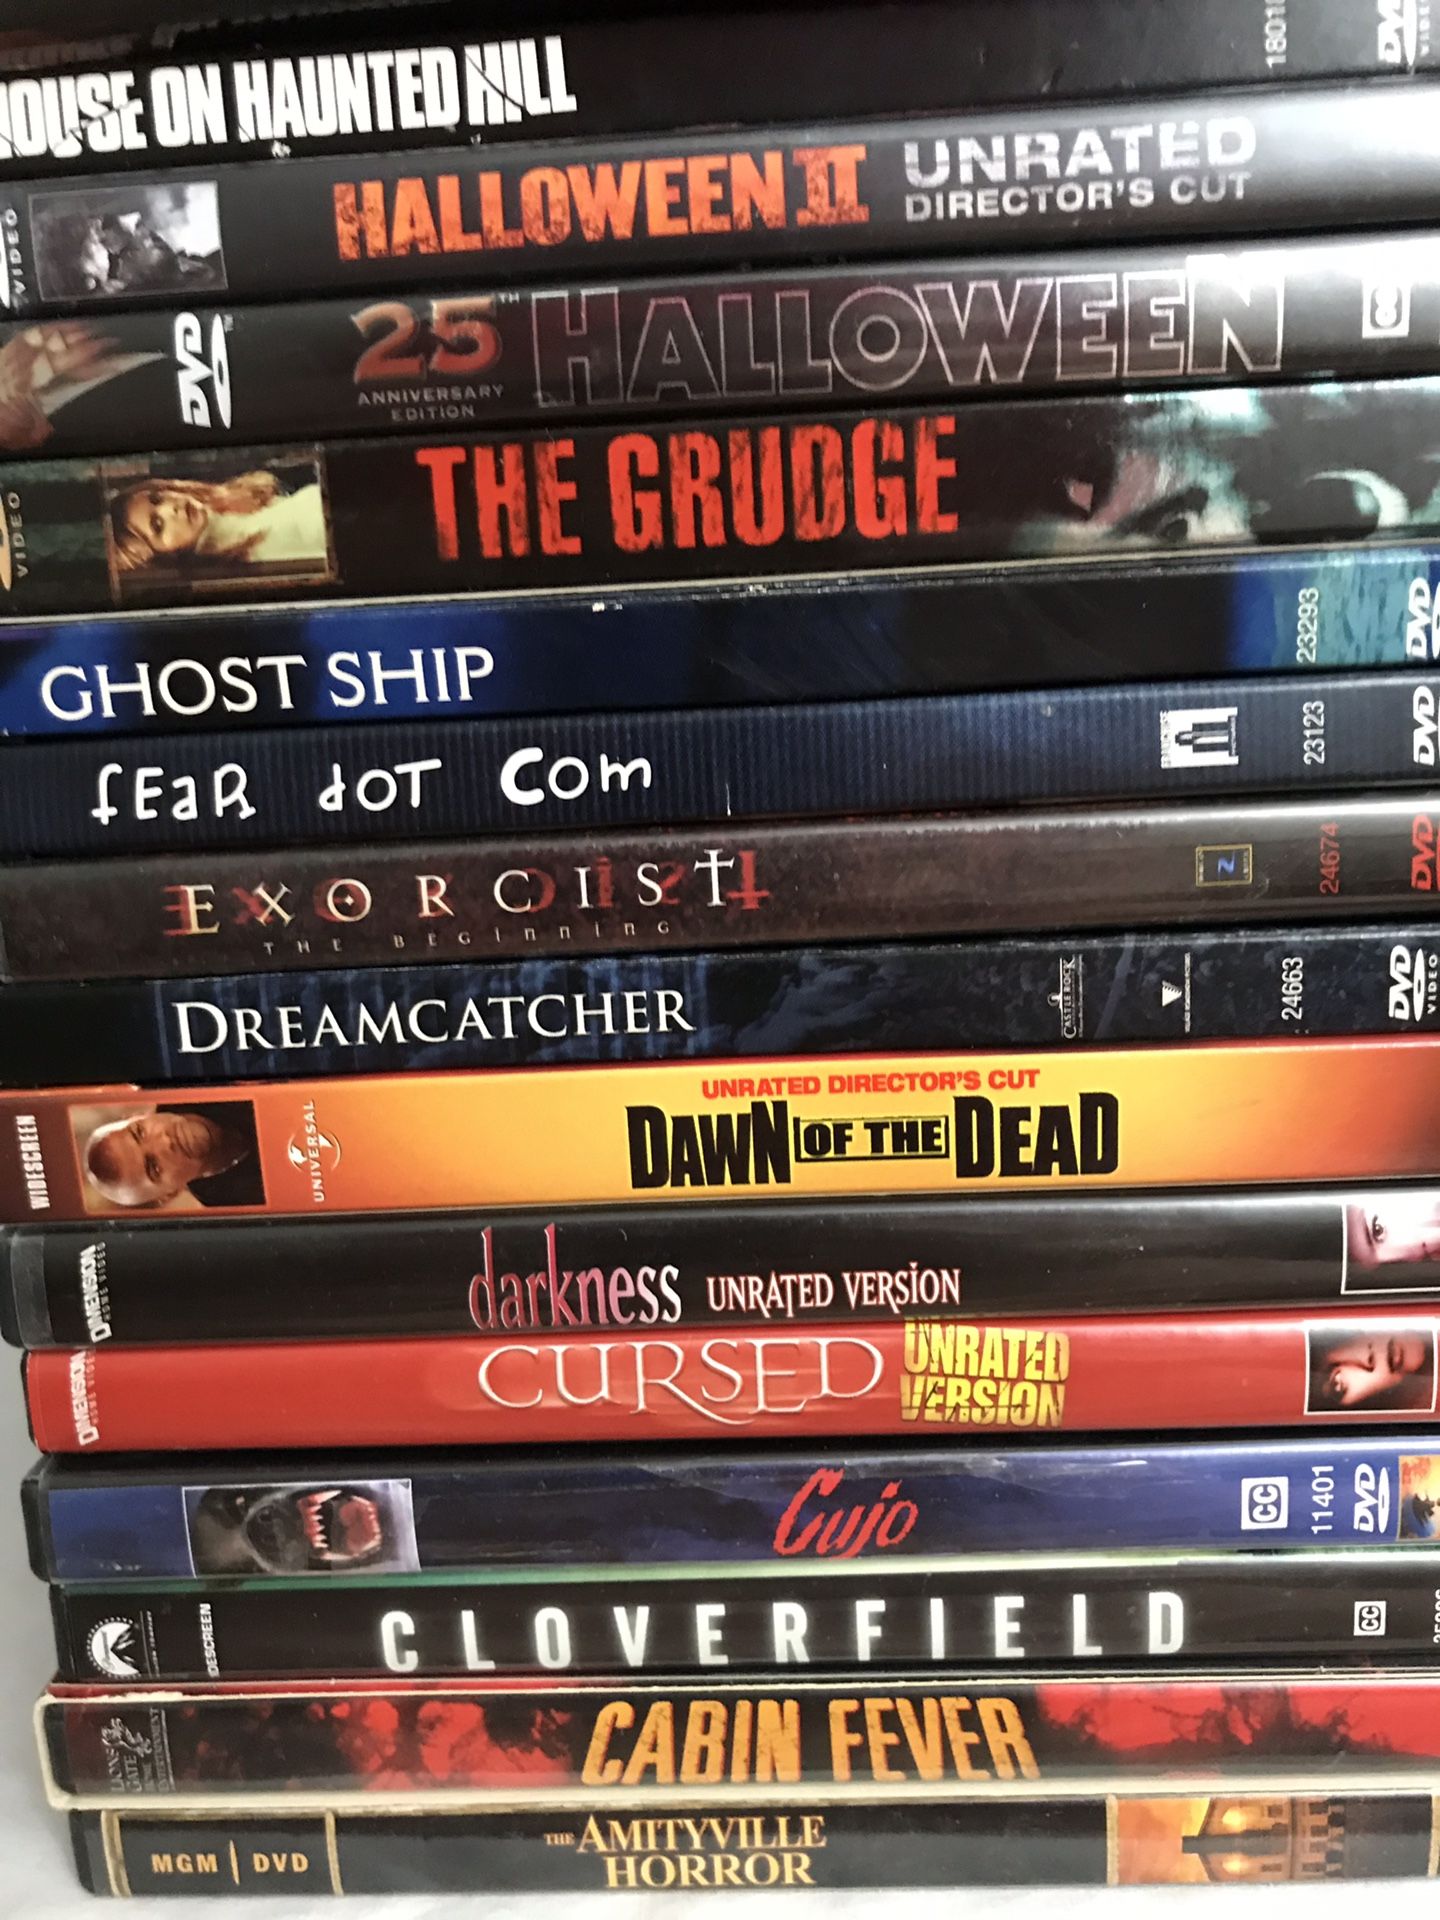 Horror movies and cult classics. DVD’s